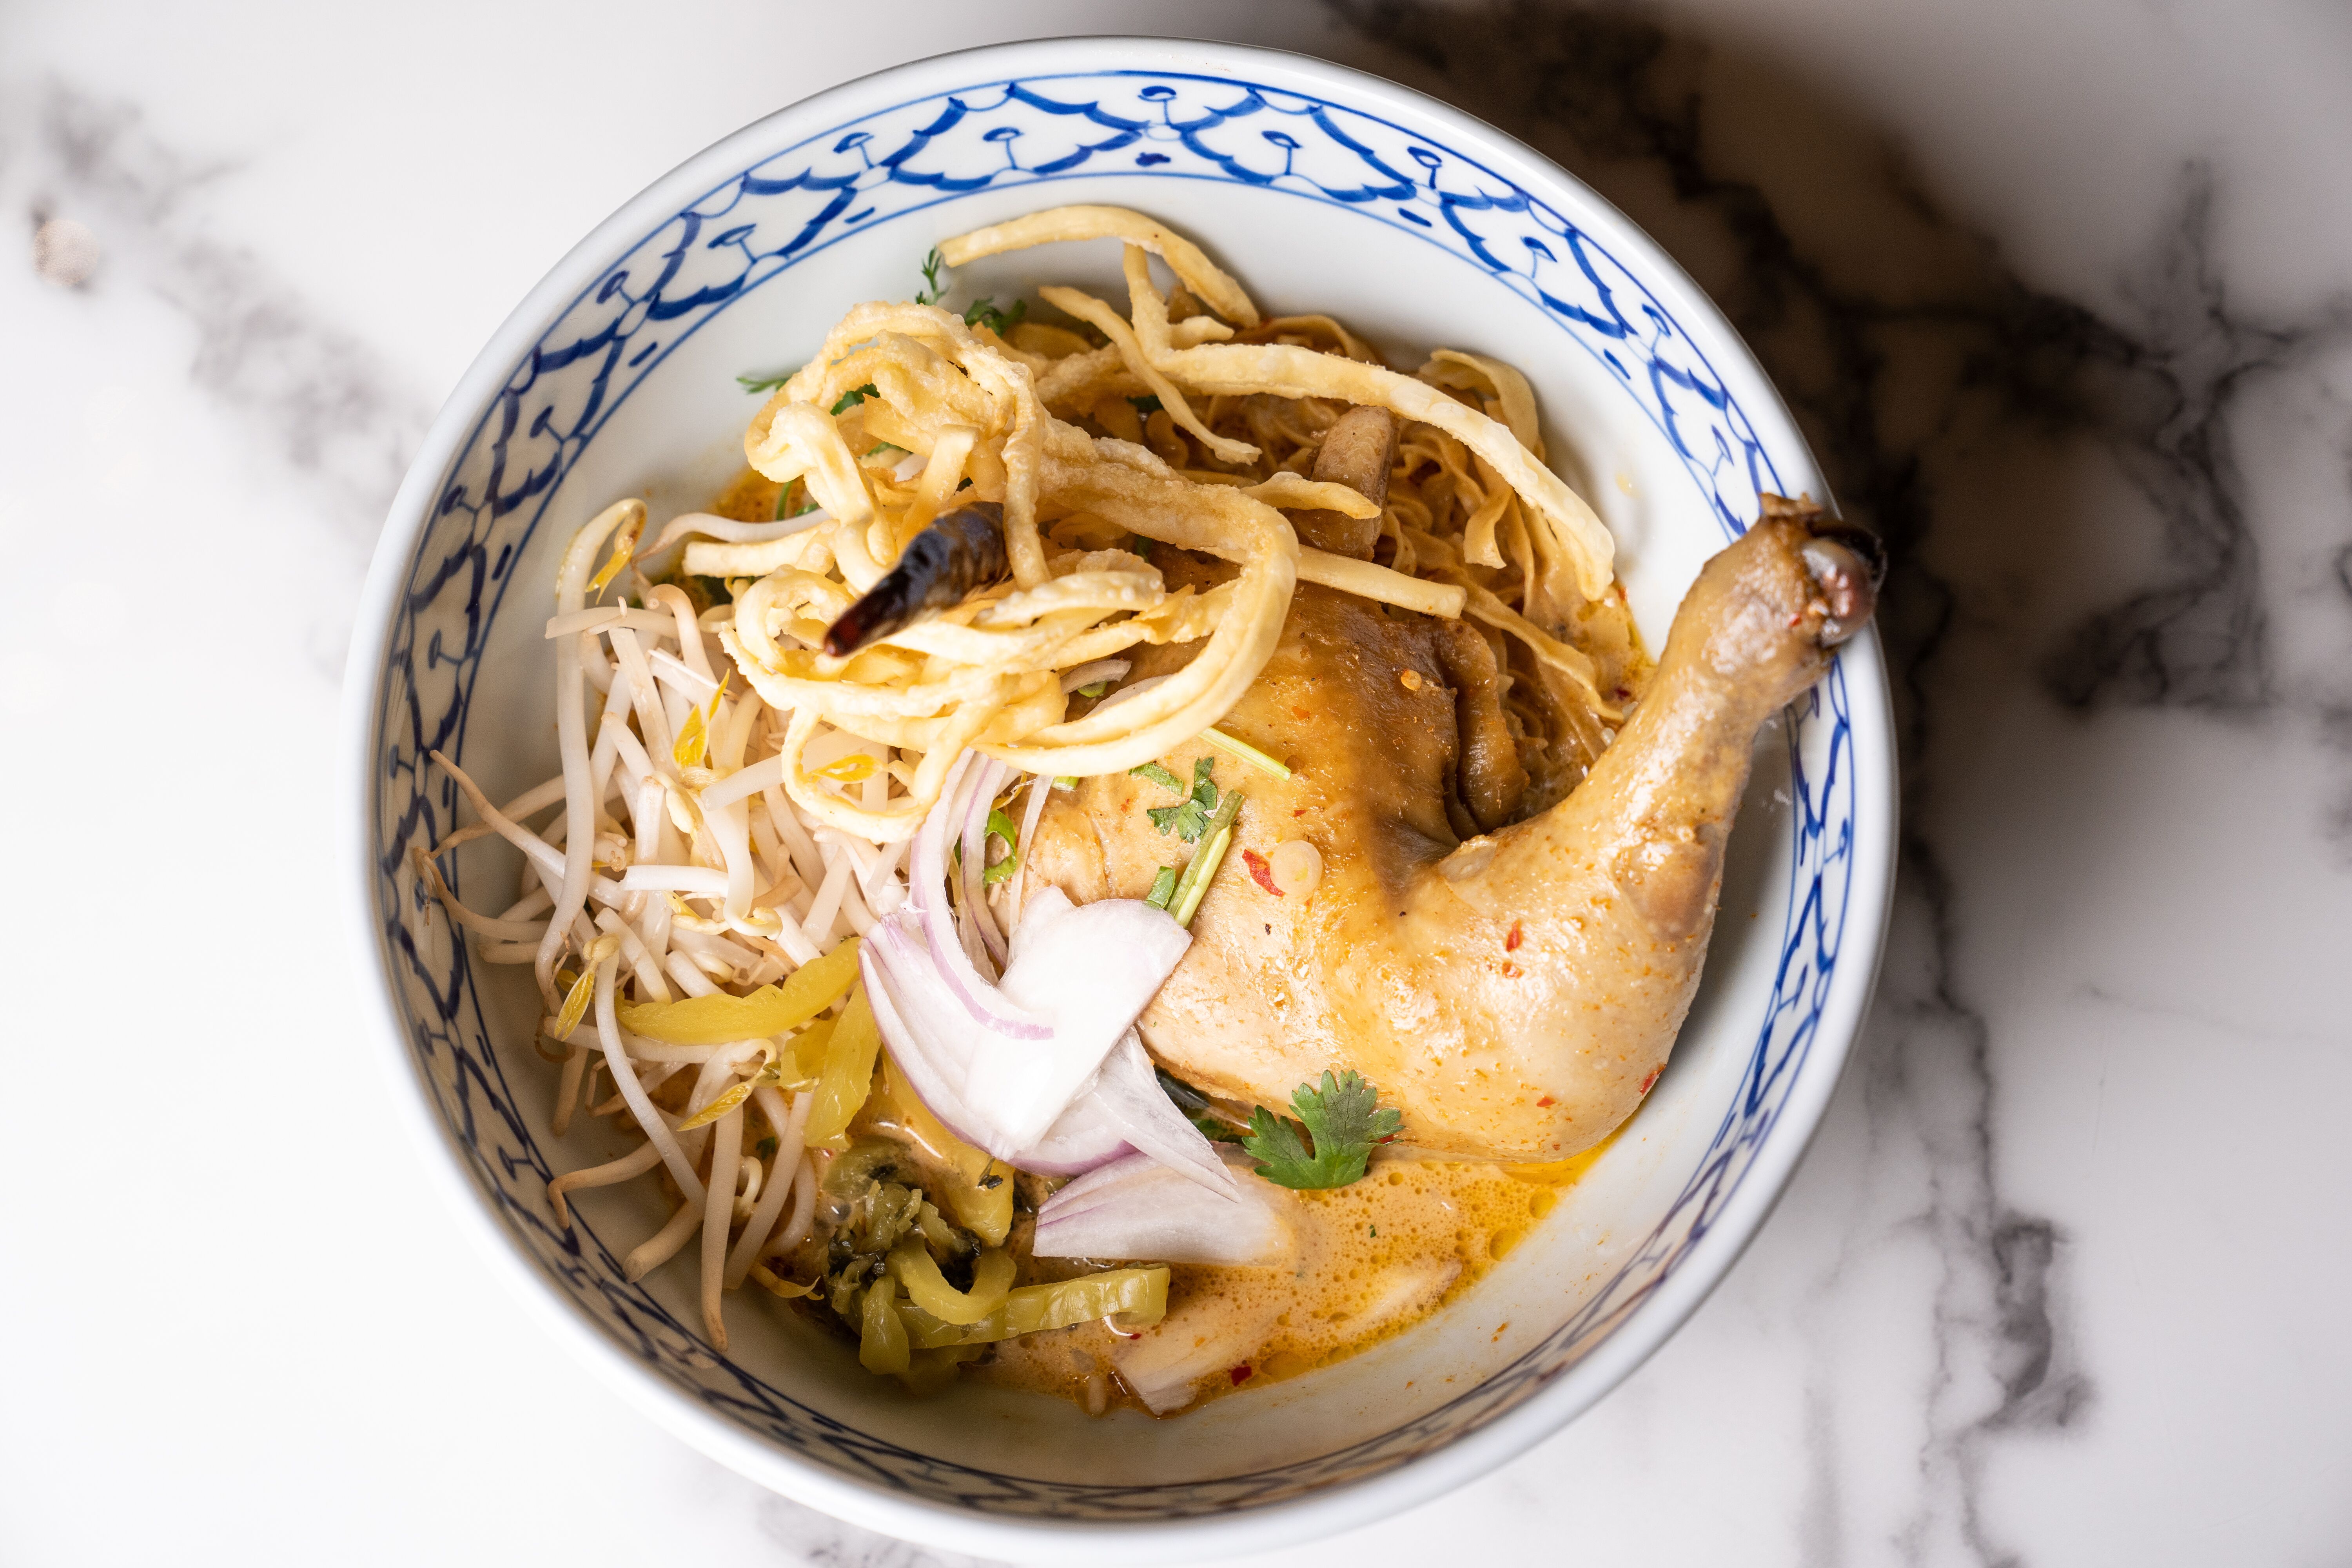 a cooked chicken thigh on a bed of thai curry noodles